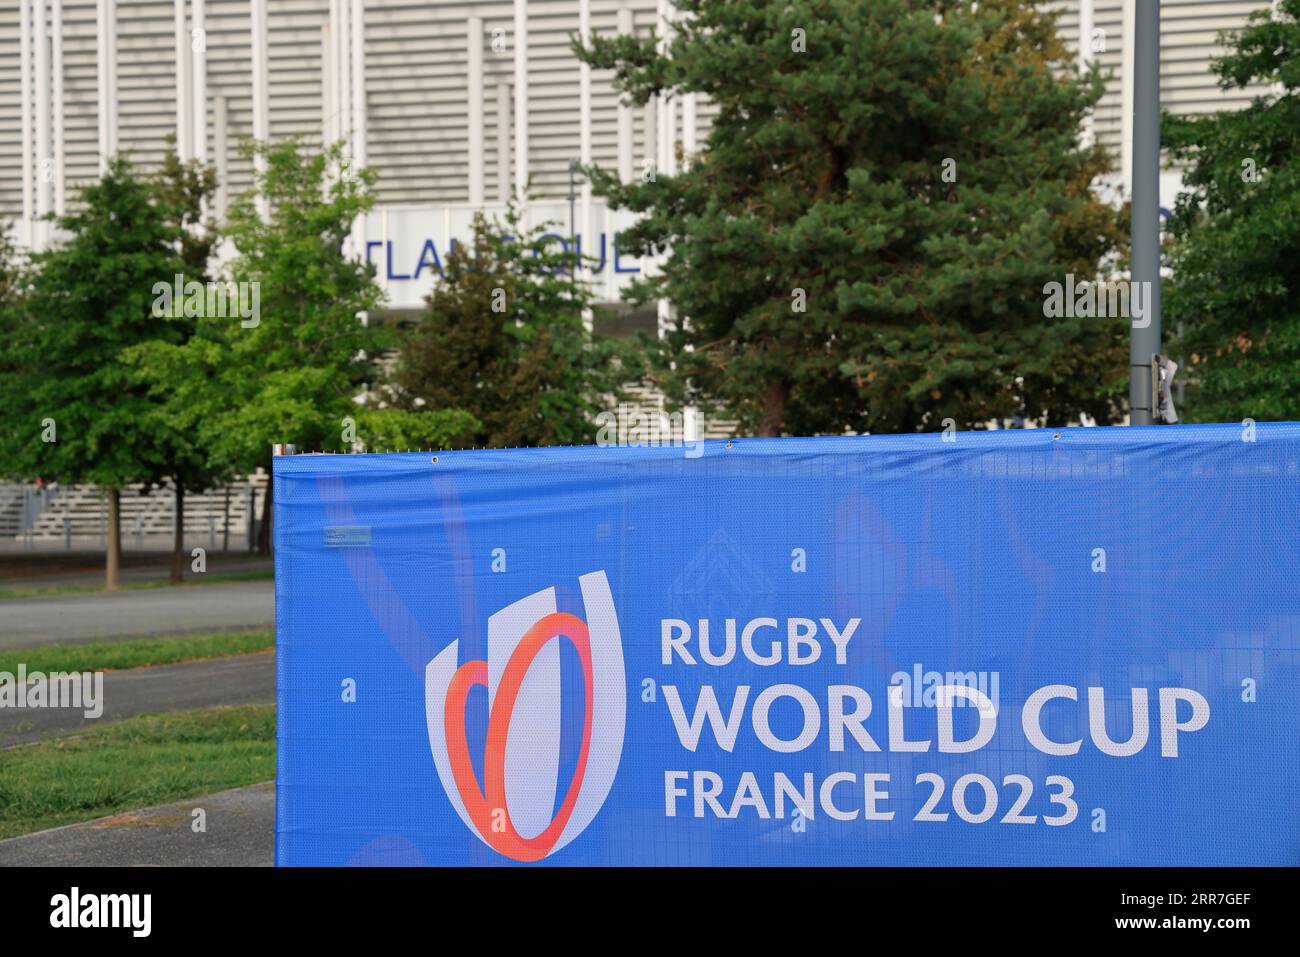 Bordeaux, France. September 6, 2023. The Matmut Atlantique multifunctional stadium in Bordeaux is ready to host 5 matches of the 2023 Rugby World Cup (Ireland-Romania, Wales-Fiji, Samoa-Chile, South Africa-Romania, Fiji-Georgia). Photo by Hugo Martin Alamy Live News. Stock Photo